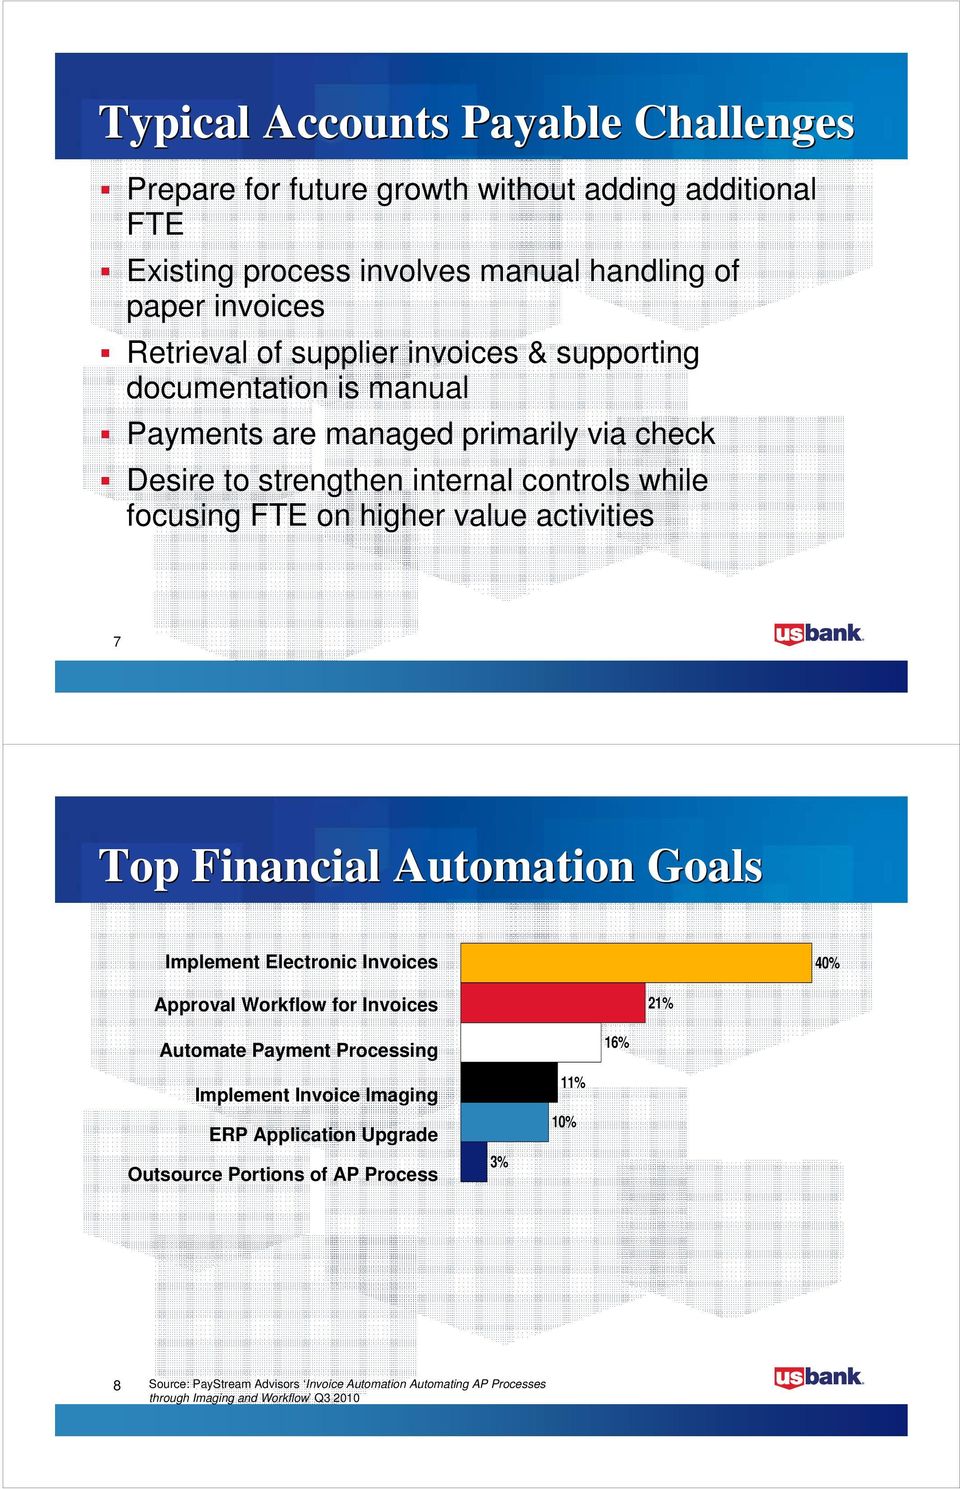 activities 7 Top Financial Automation Goals Implement Electronic Invoices 40% Approval Workflow for Invoices 21% Automate Payment Processing 16% Implement Invoice Imaging